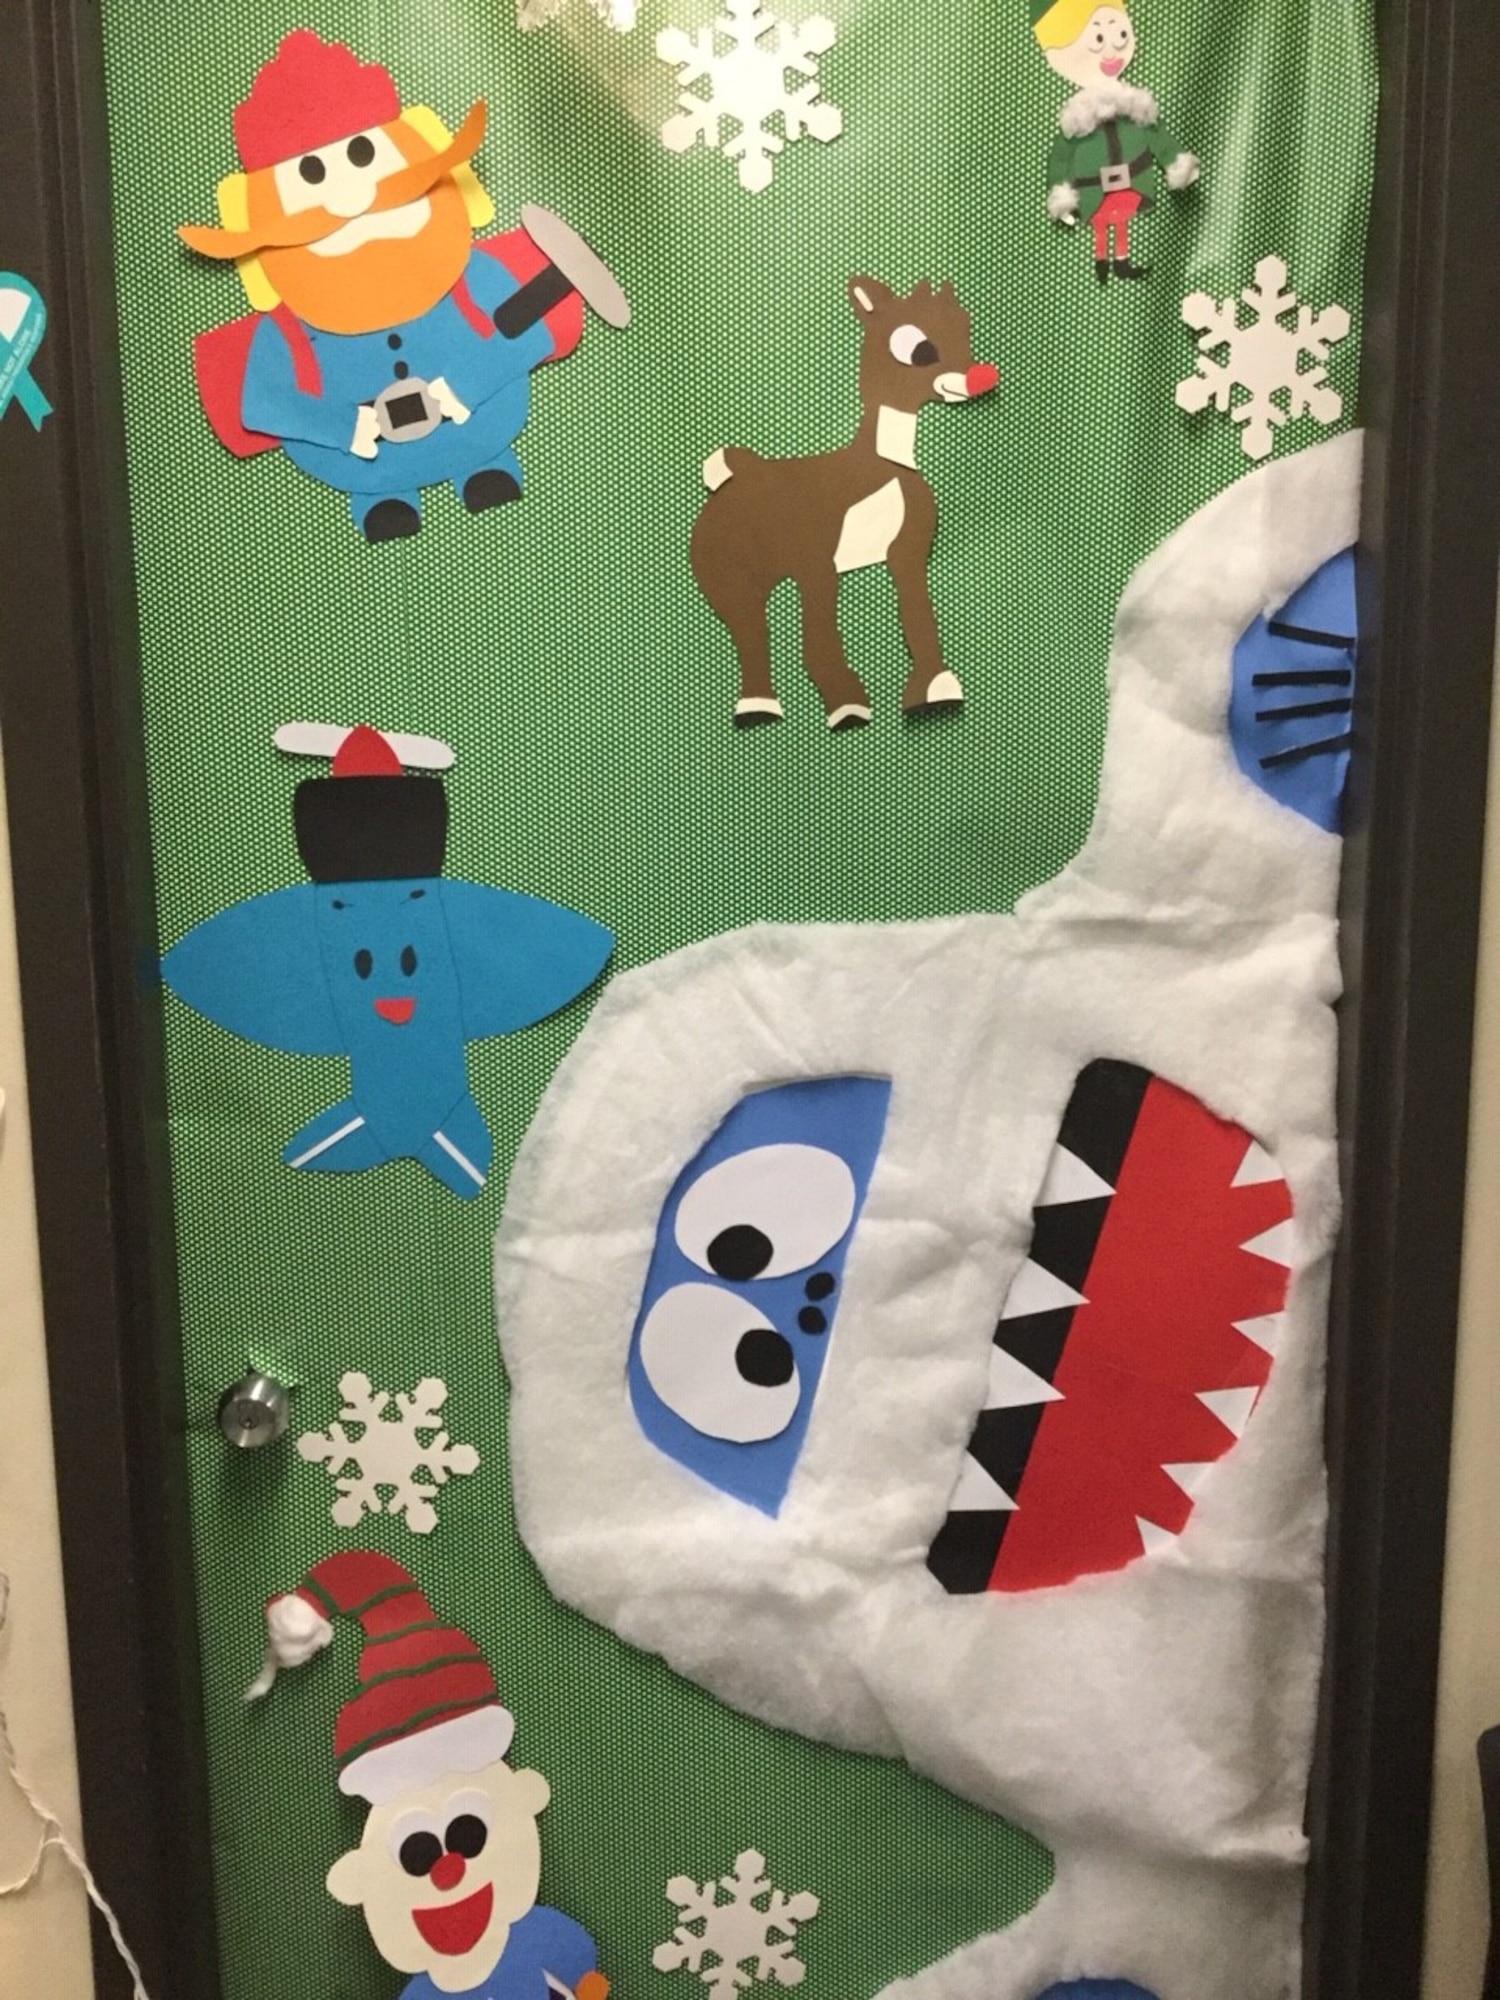 Senior Master Sgt. Catherine Devine’s, 434th military personnel superintendent, office door won the 2019 holiday door decorating contest at Grissom Air Reserve Base, Indiana. The Airman & Family Readiness Center is hosting this year’s contest and judging for the contest will be held on Dec. 6, 2020 by members from Grissom’s Key Spouse program. (Courtesy Photo)